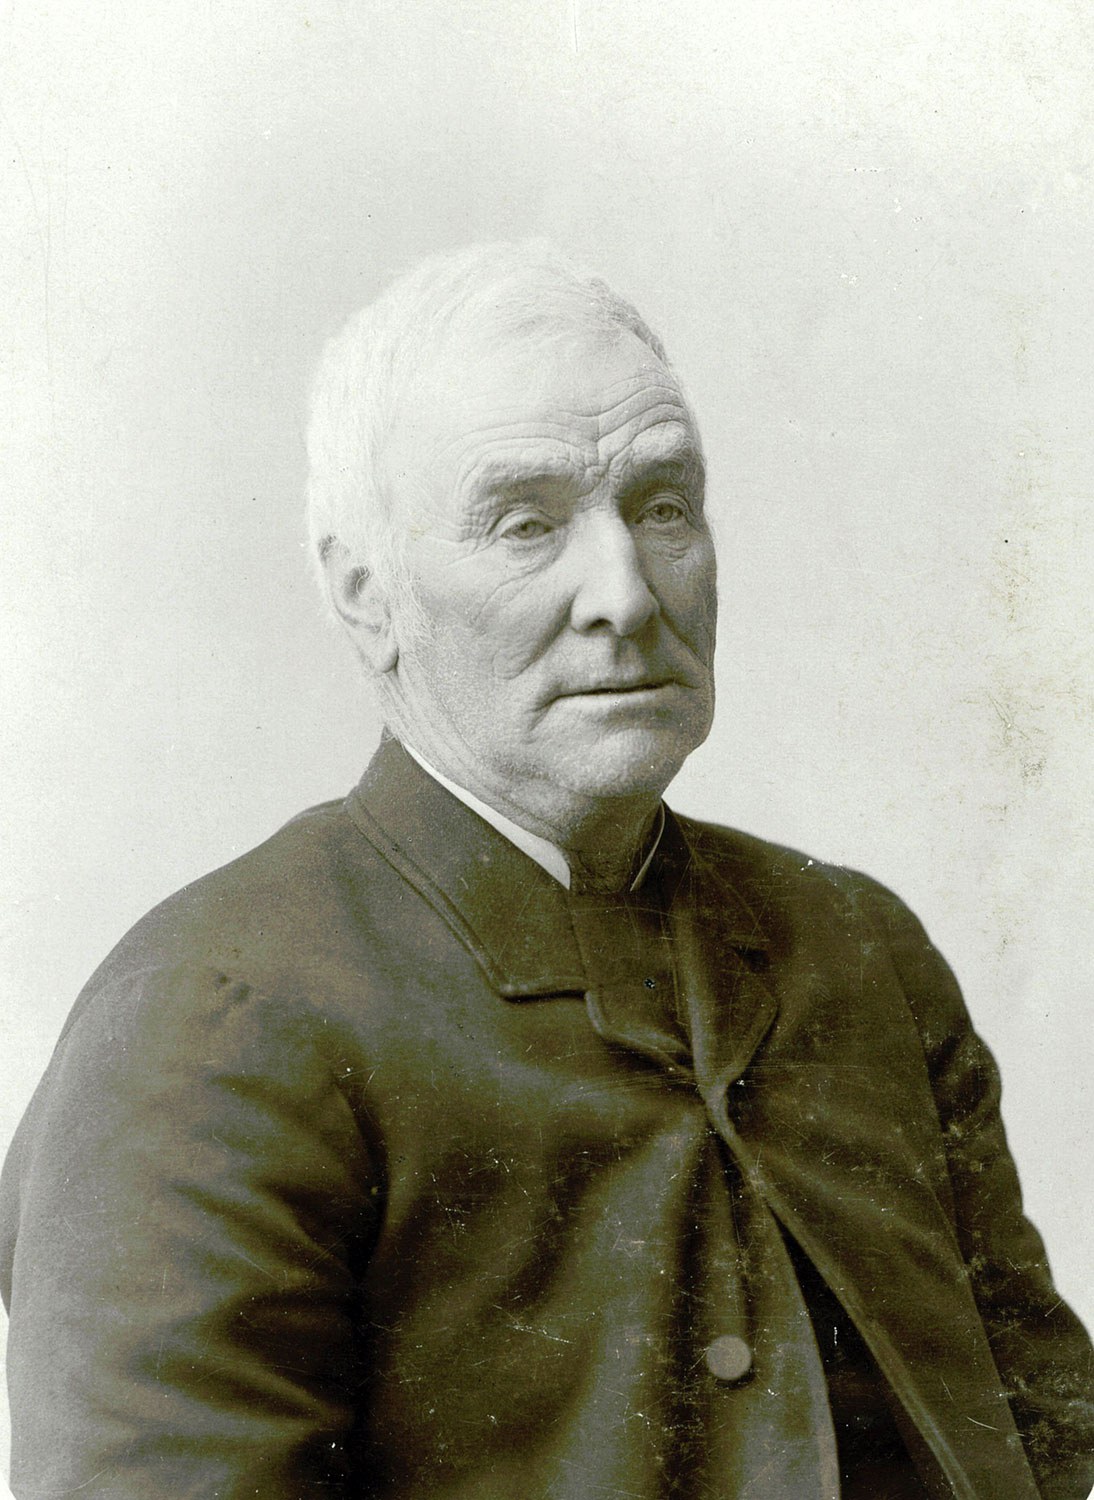 Scottish immigrant John Miller (1817-1904) settled Thistle Ha’ farm in 1839. Photo taken circa 1883. (Reproduced with permission from the Thistle Ha’ private collection.)